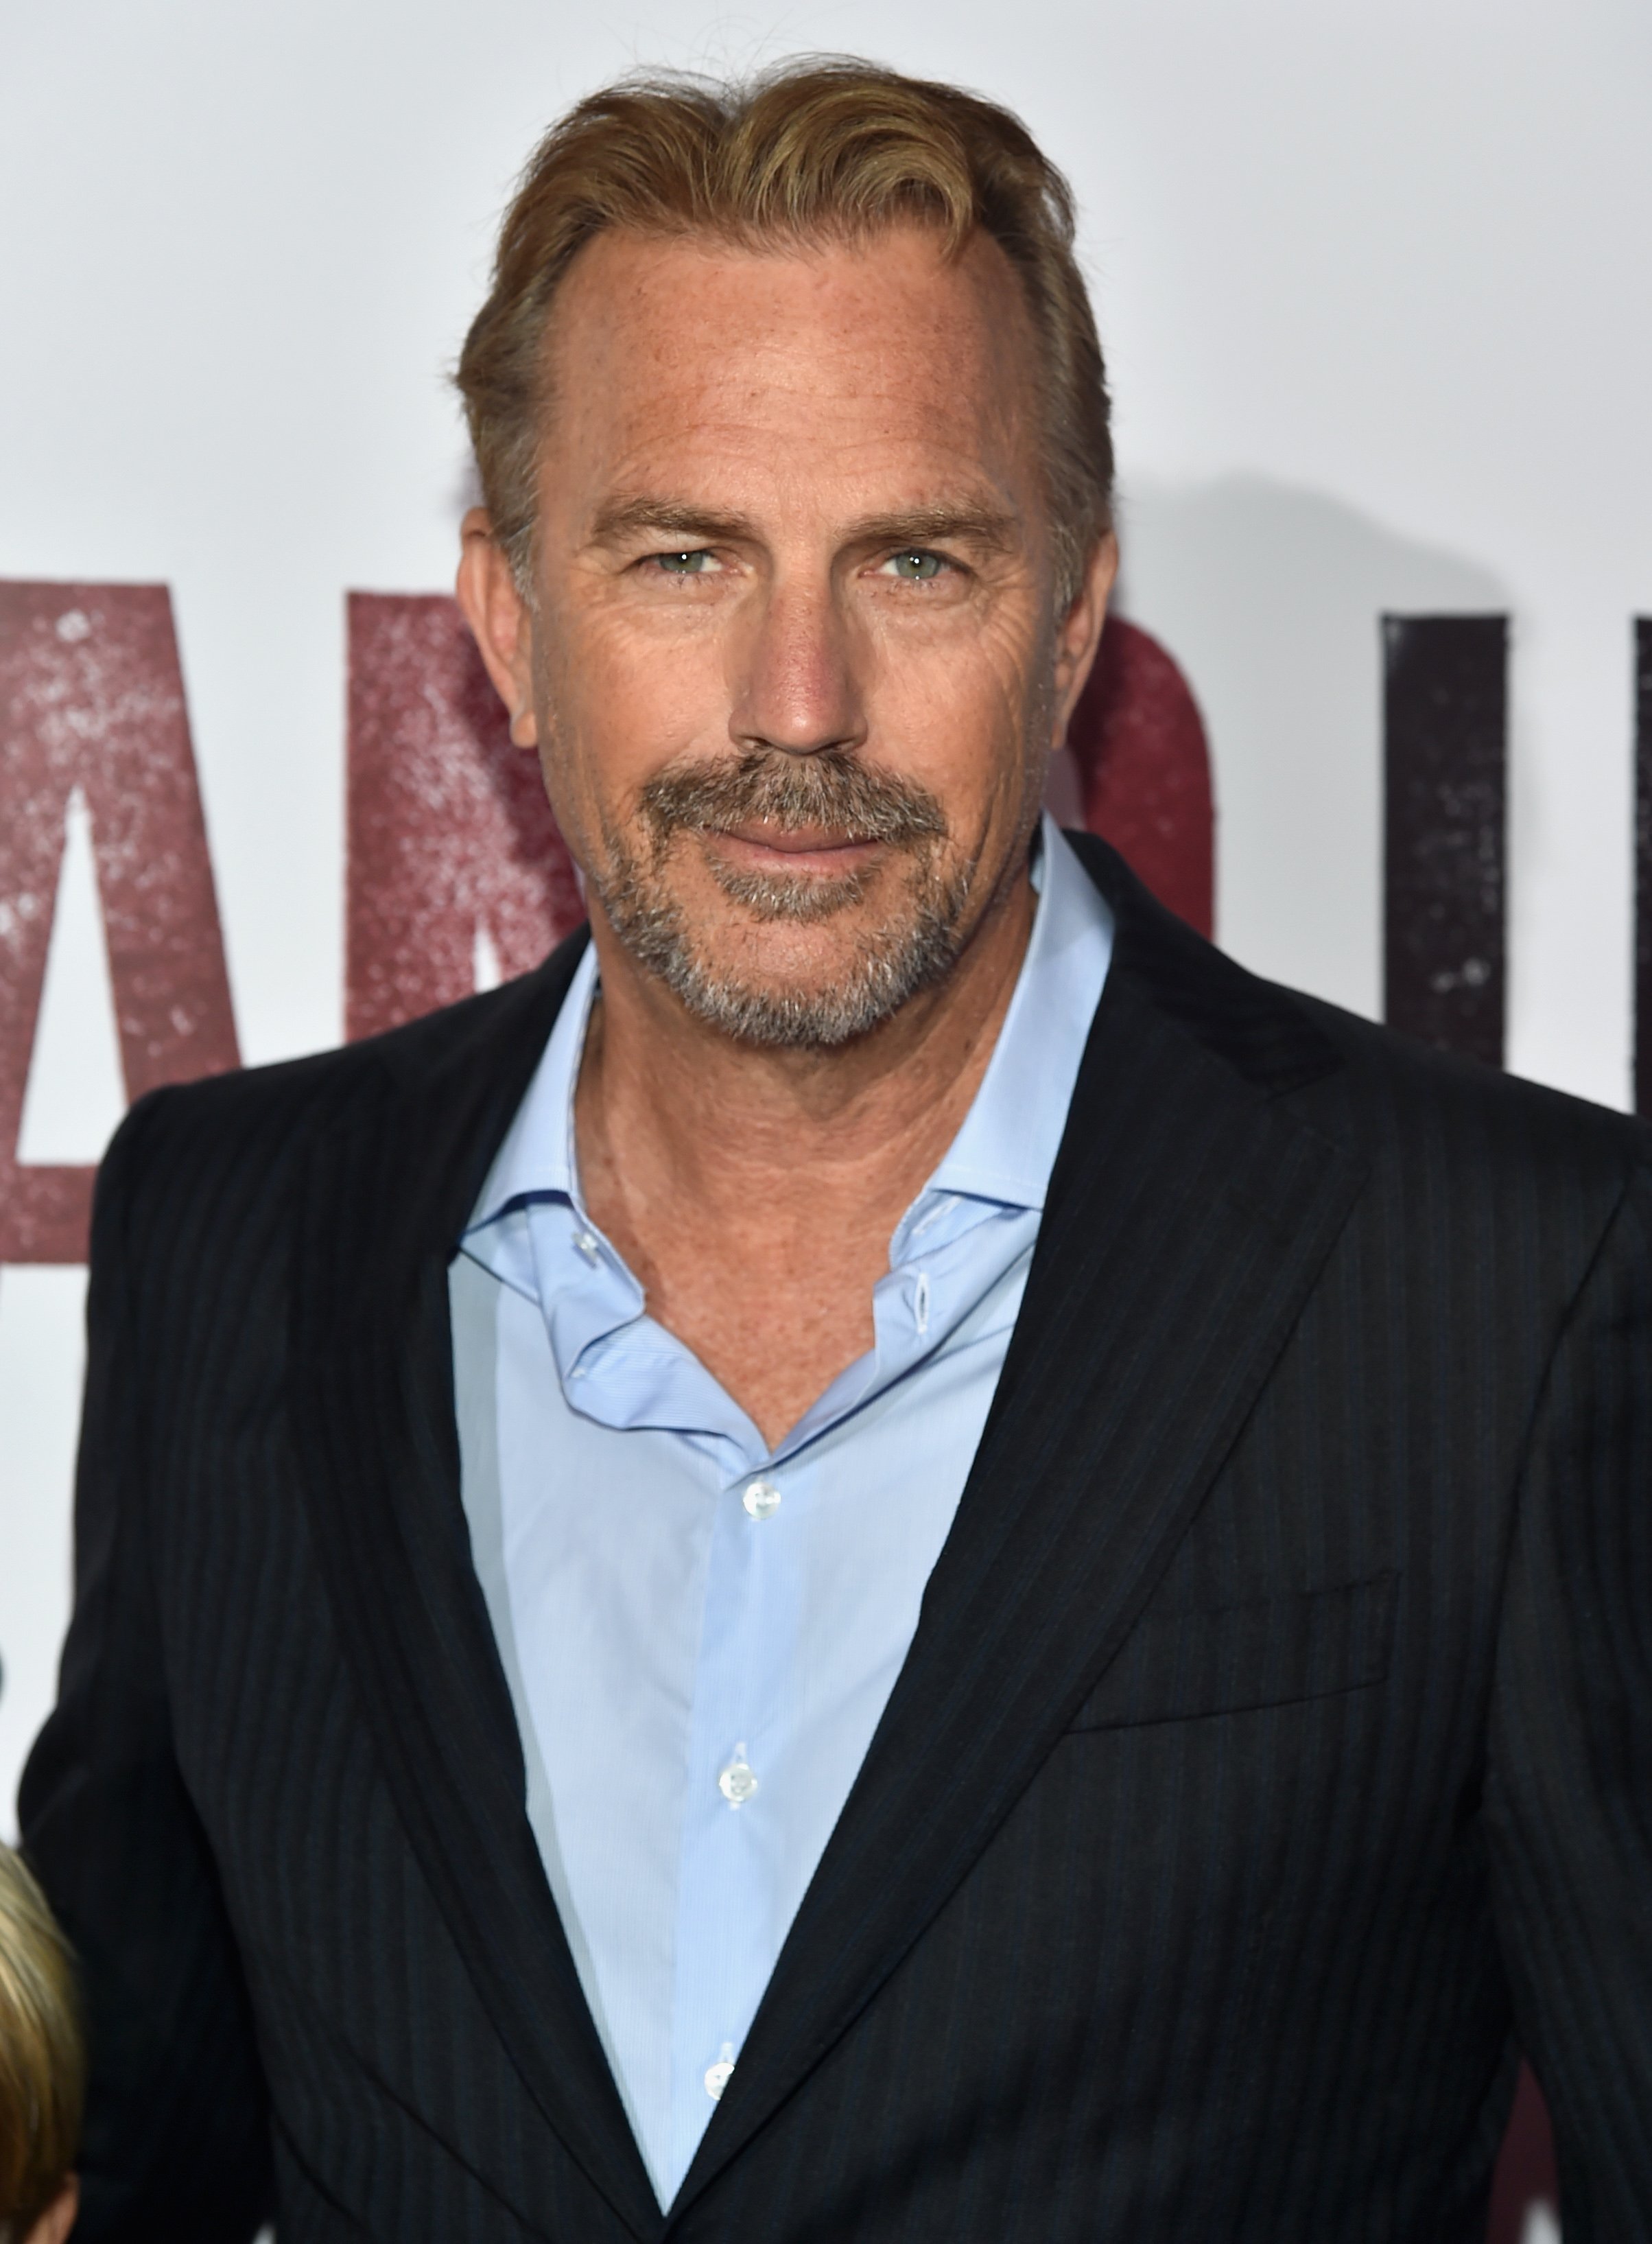 Actor Kevin Costner attends the world premiere of "McFarland, USA" at The El Capitan Theatre on February 9, 2015 in Hollywood, California | Source: Getty Images